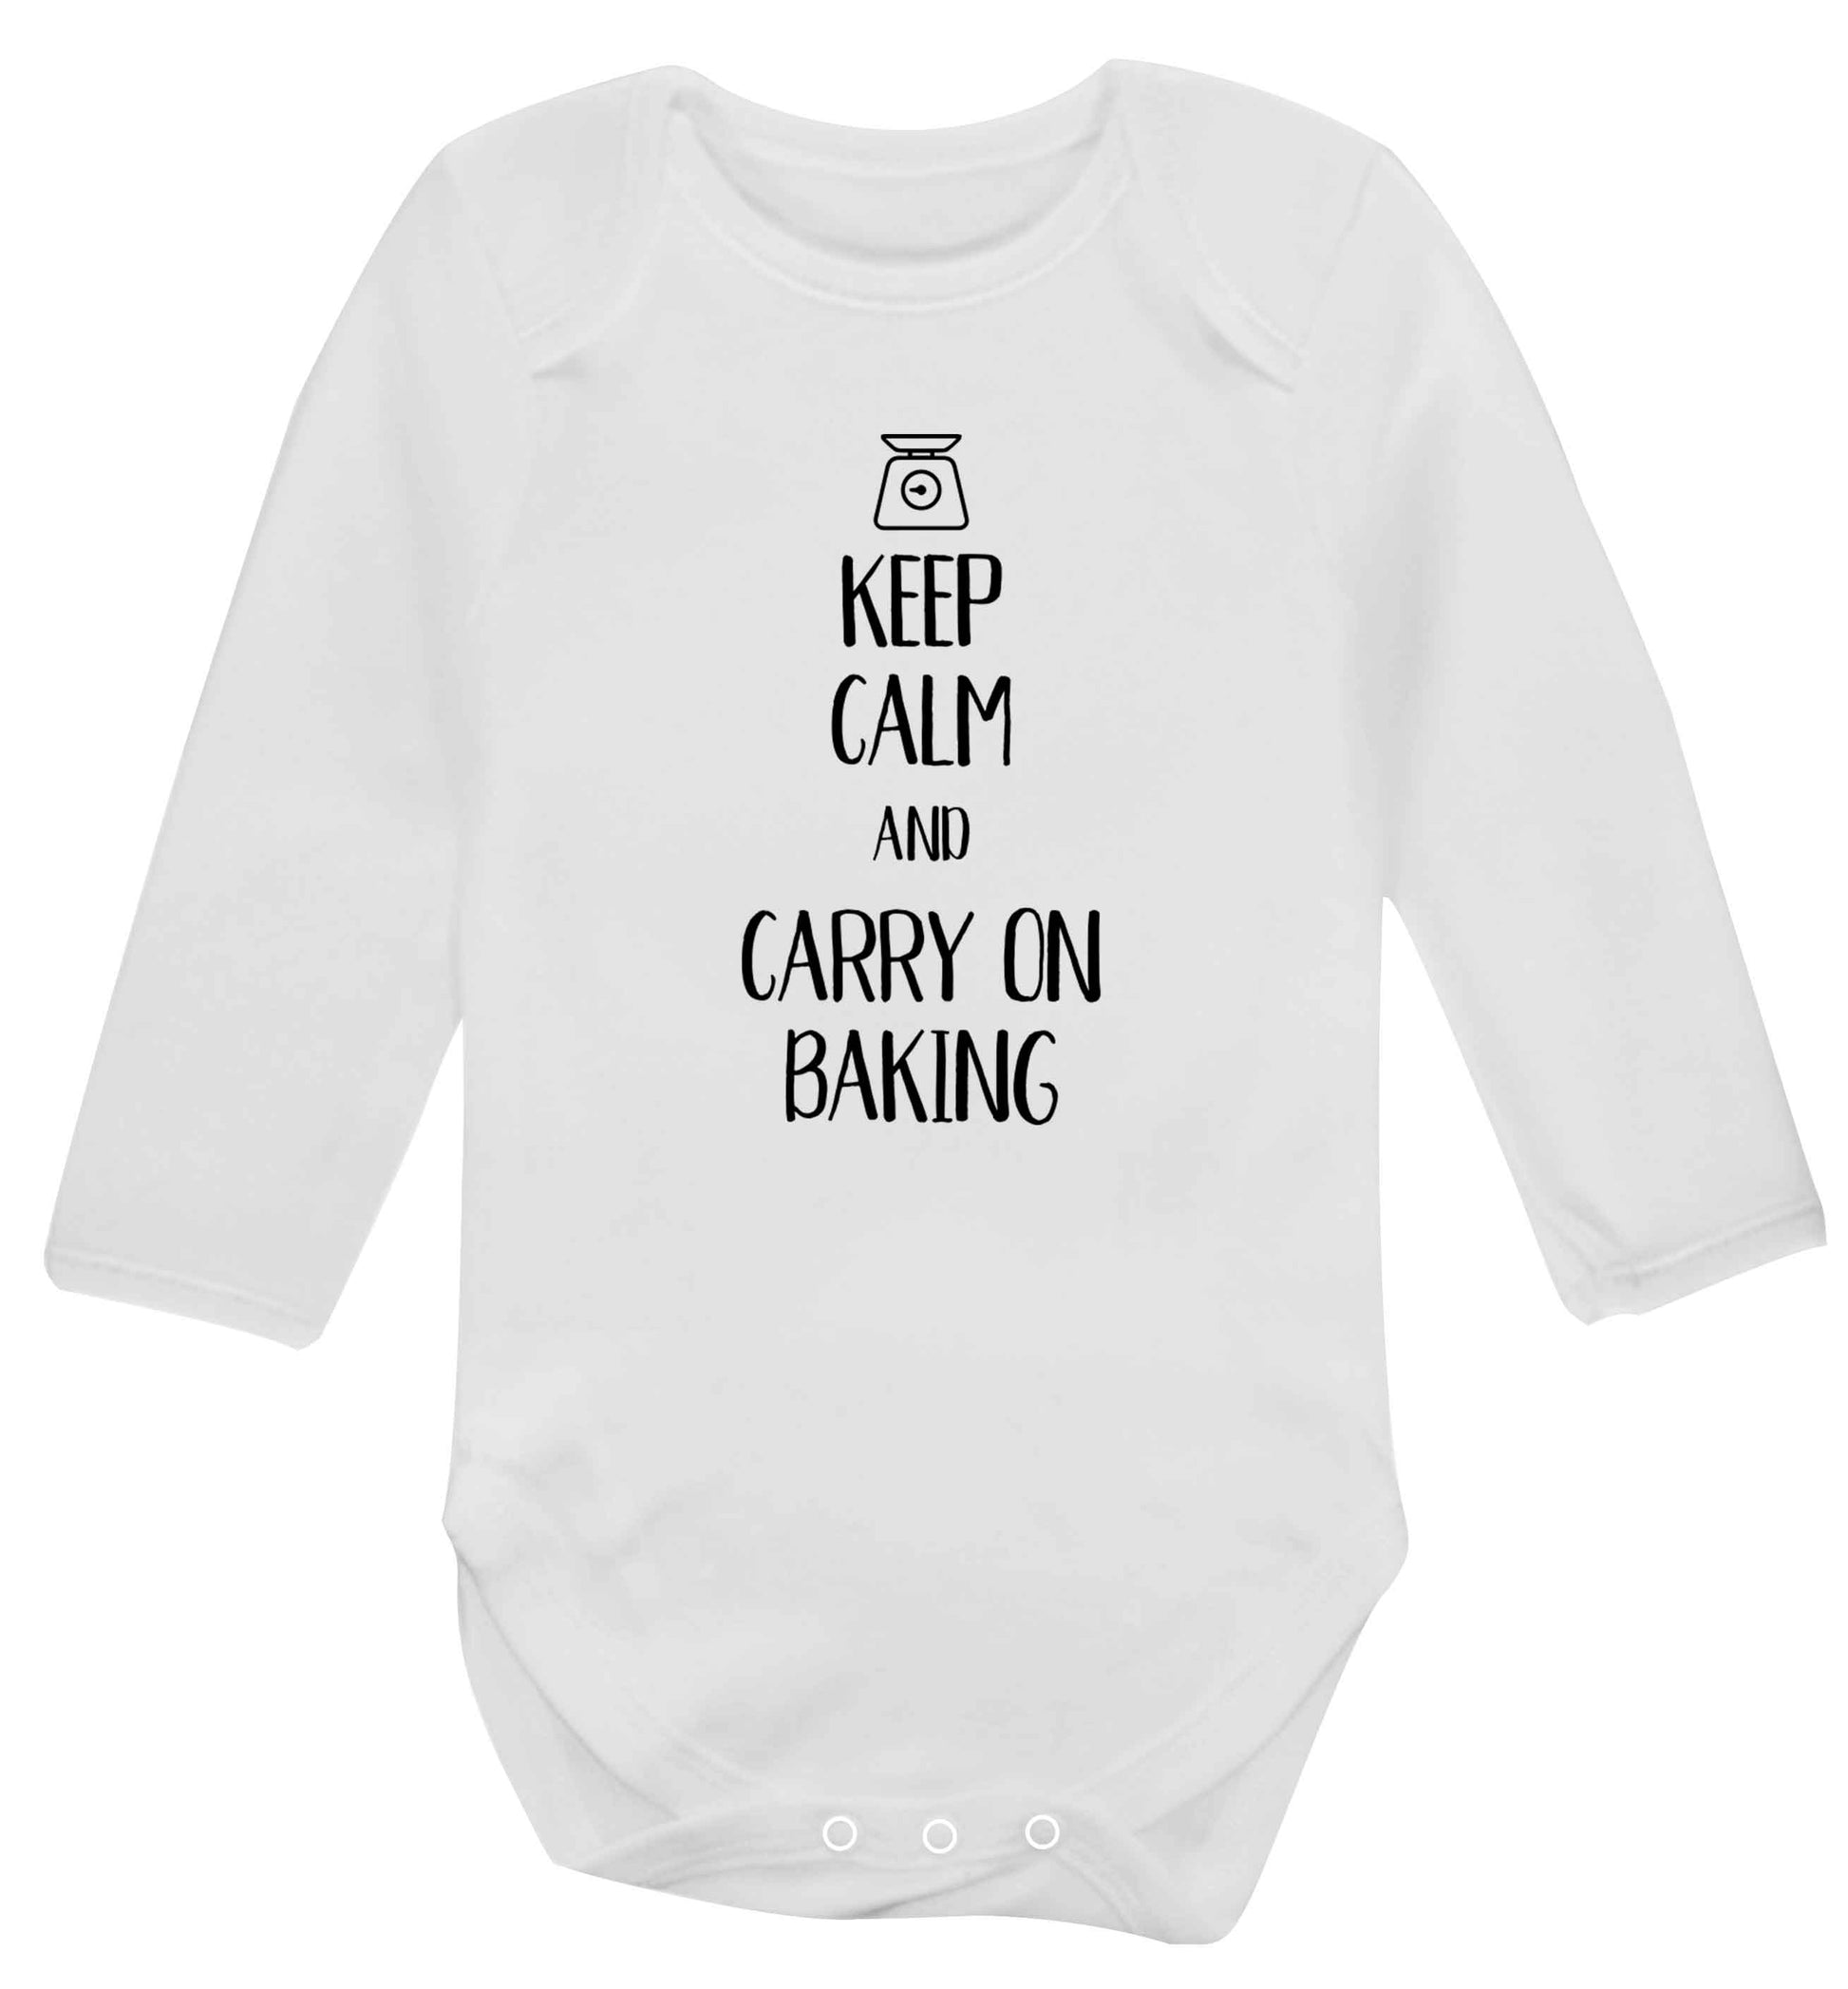 Keep calm and carry on baking Baby Vest long sleeved white 6-12 months